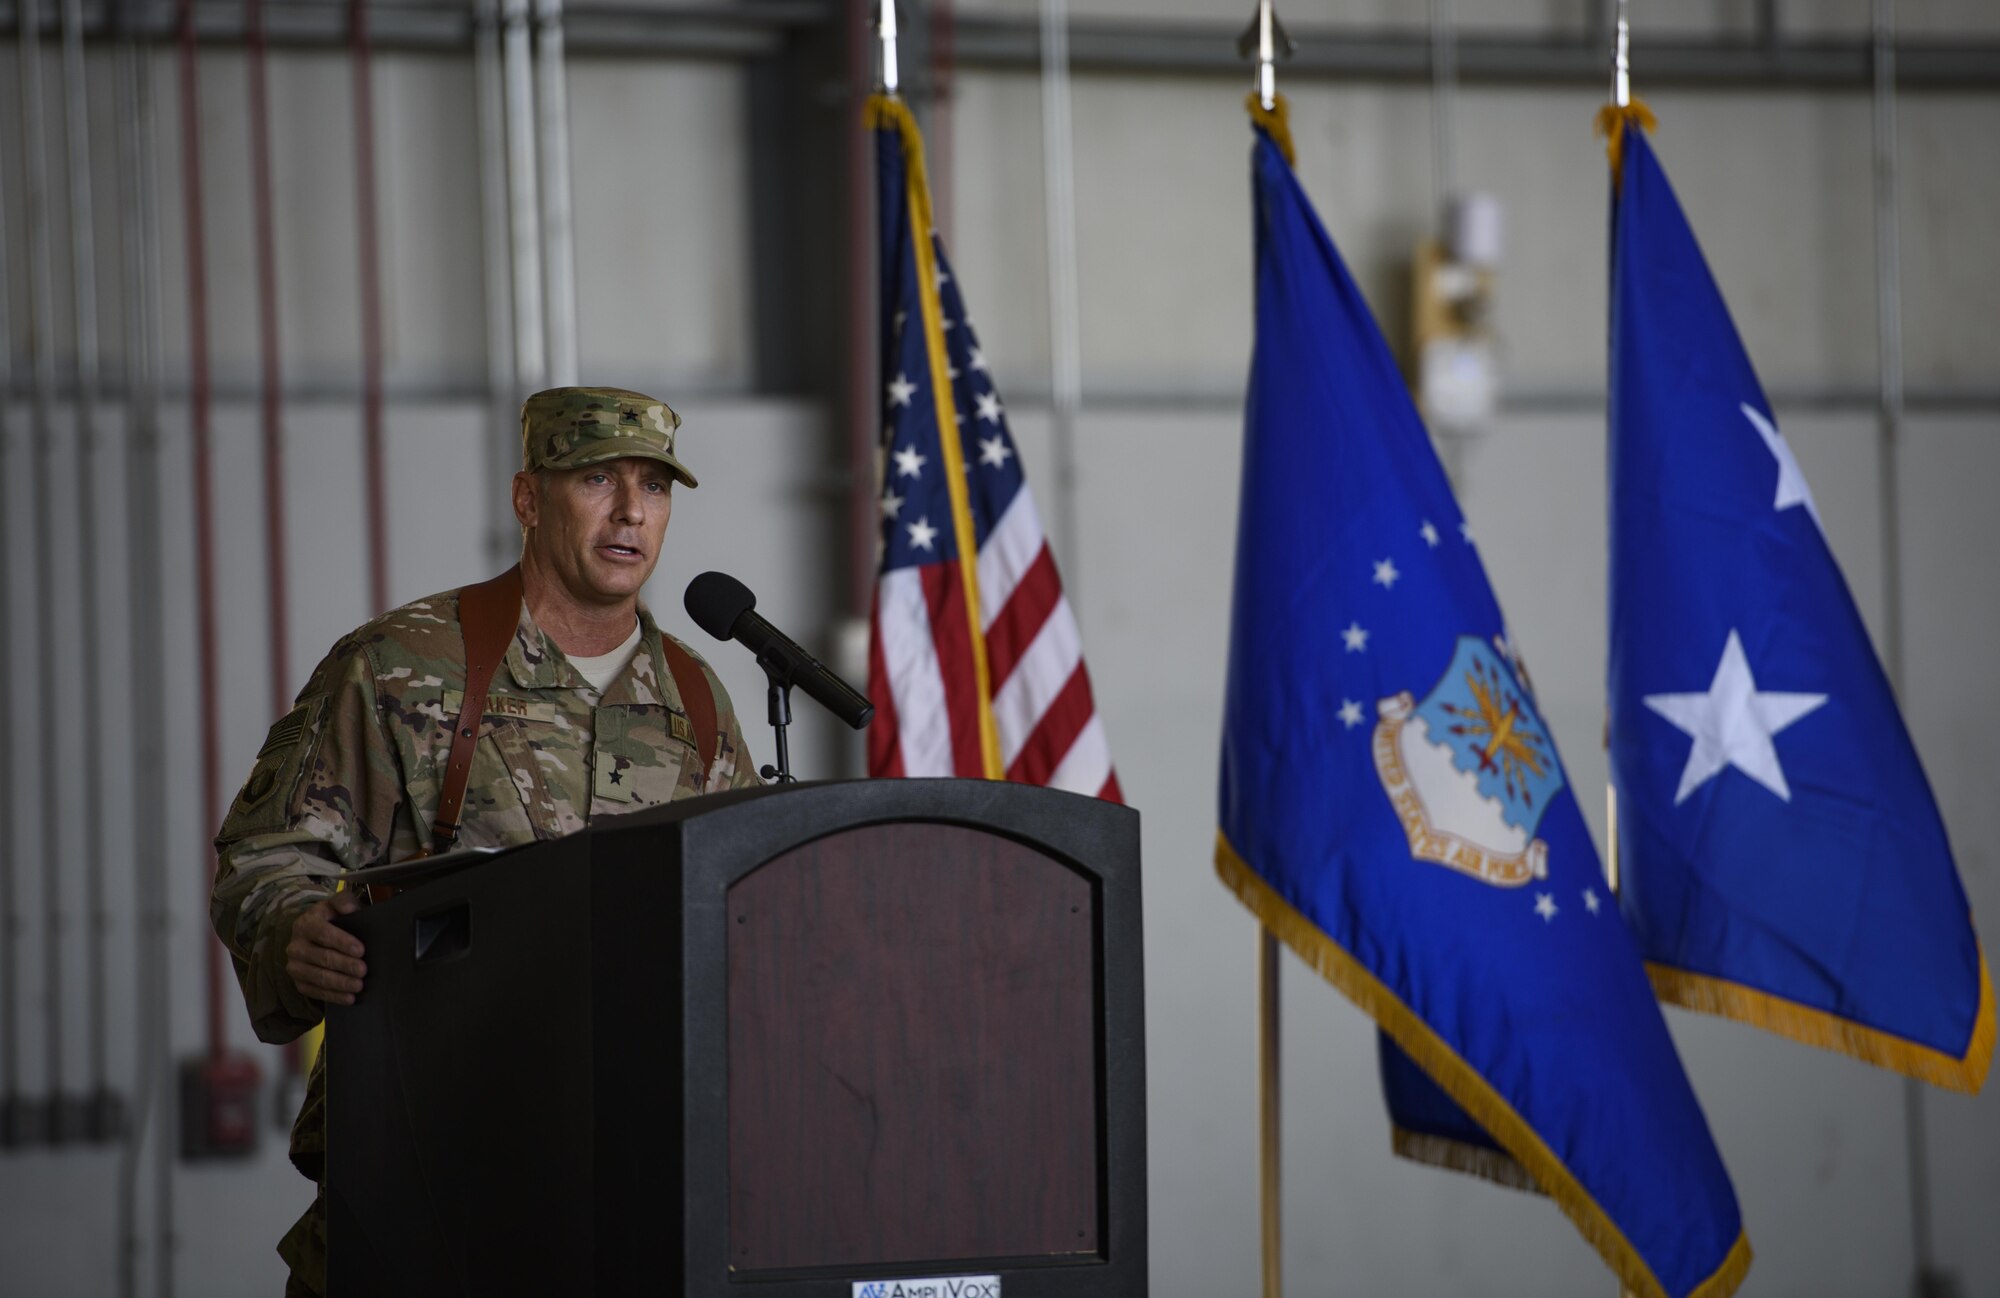 Brig. Gen. Craig Baker, the 455th Air Expeditionary Wing commander, speaks to 455th AEW Airmen and distinguished guests during a change of command ceremony at Bagram Airfield, Afghanistan, June 3, 2017. As the commander of the 455th AEW, Baker will lead the premier counterterrorism air mission in Afghanistan. The wing’s operations enable the NATO Resolute Support mission to successfully train, advise, and assist the military and security forces of Afghanistan, while restricting and deterring the terrorist threat in the region. (U.S. Air Force photo by Staff Sgt. Benjamin Gonsier)